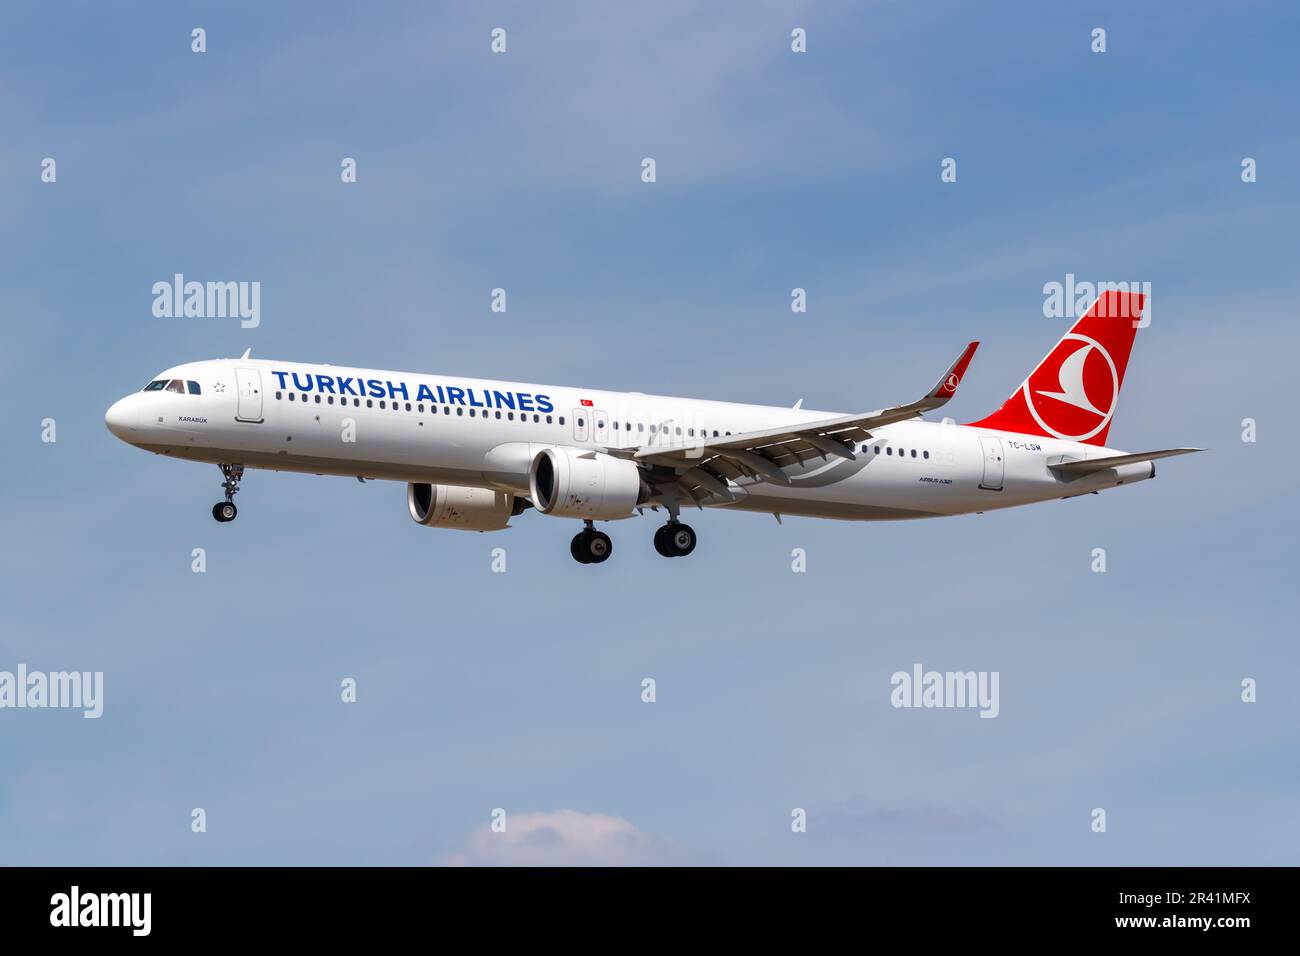 Turkish Airlines Airbus A321neo aircraft Frankfurt Airport in Germany Stock Photo